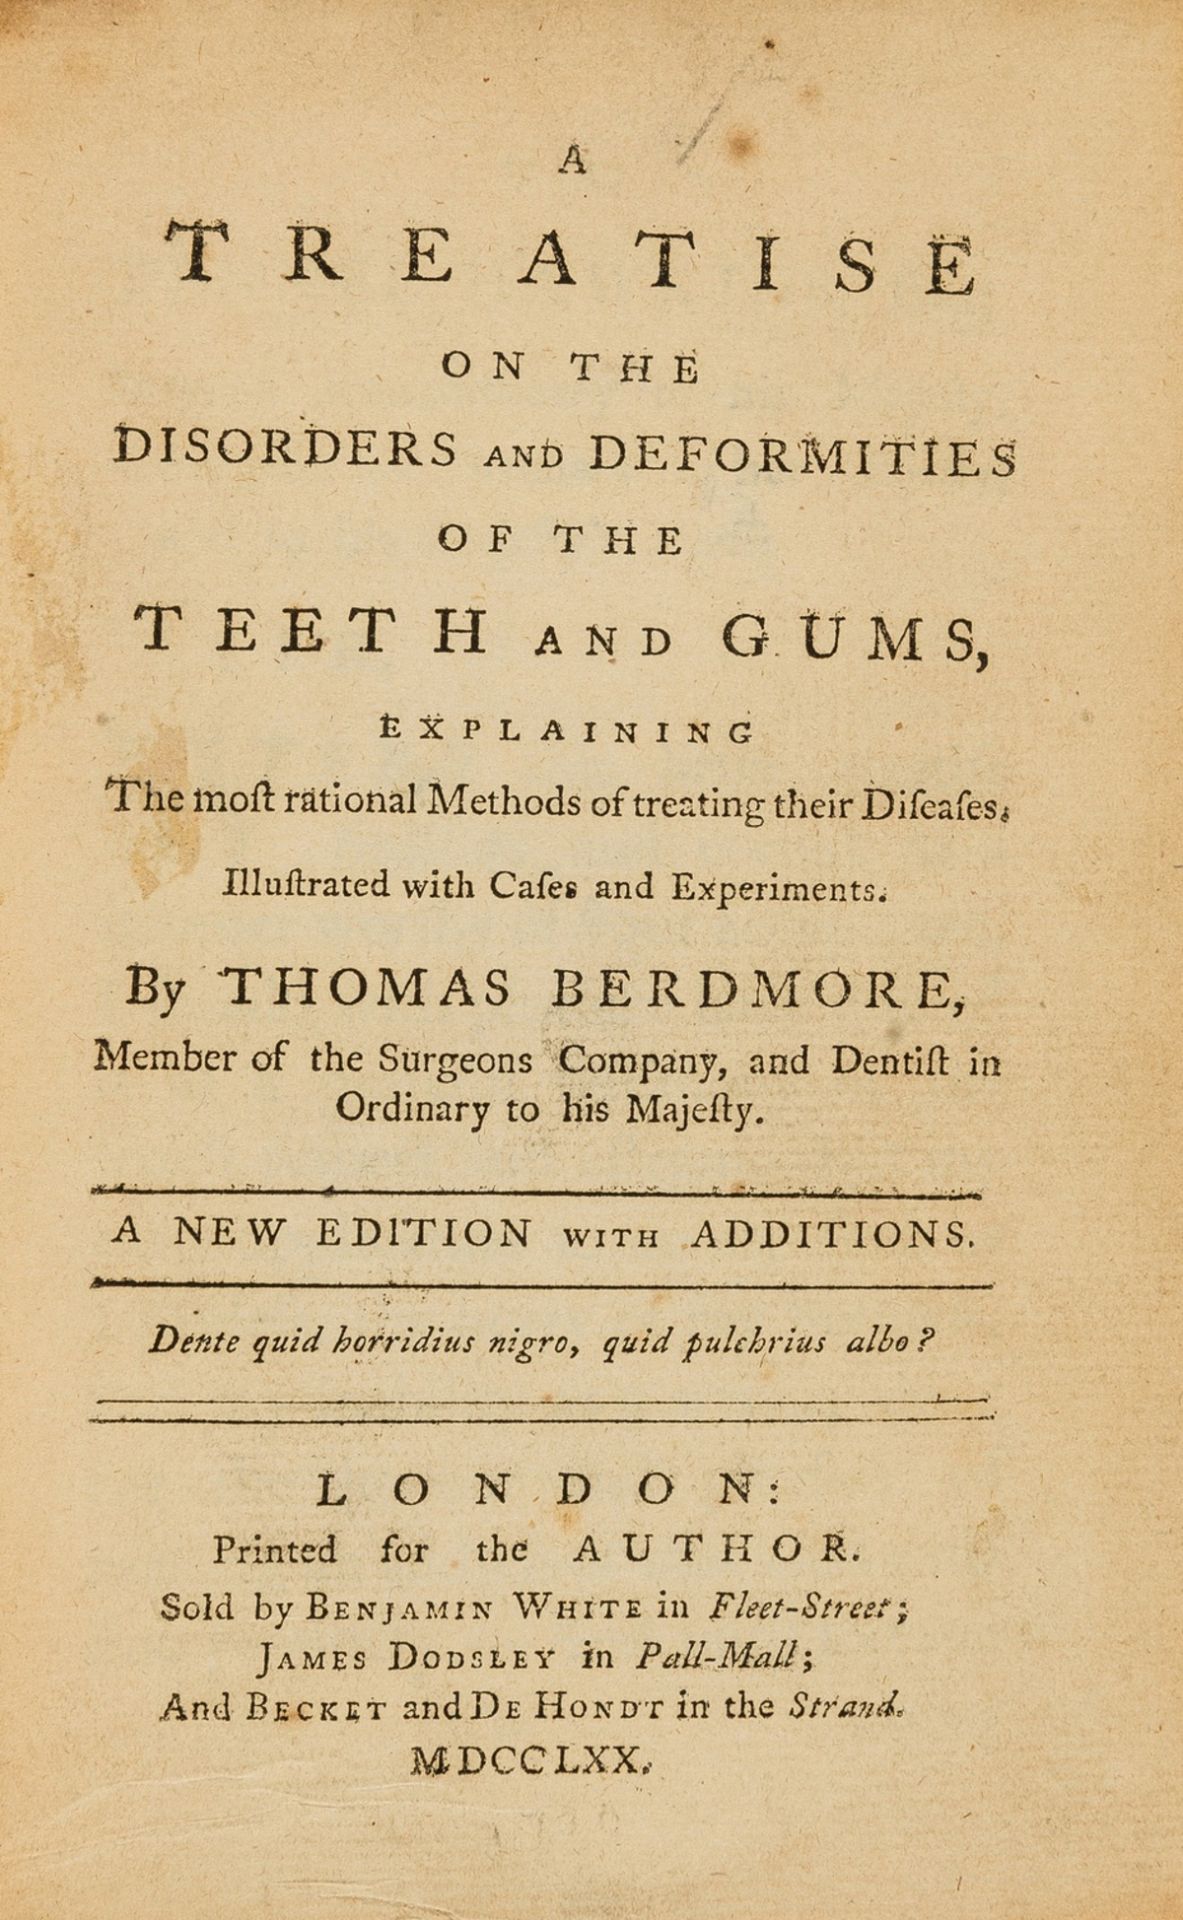 Dentistry.- Berdmore (Thomas) A Treatise on the Disorders and Deformities of the Teeth and Gums, …